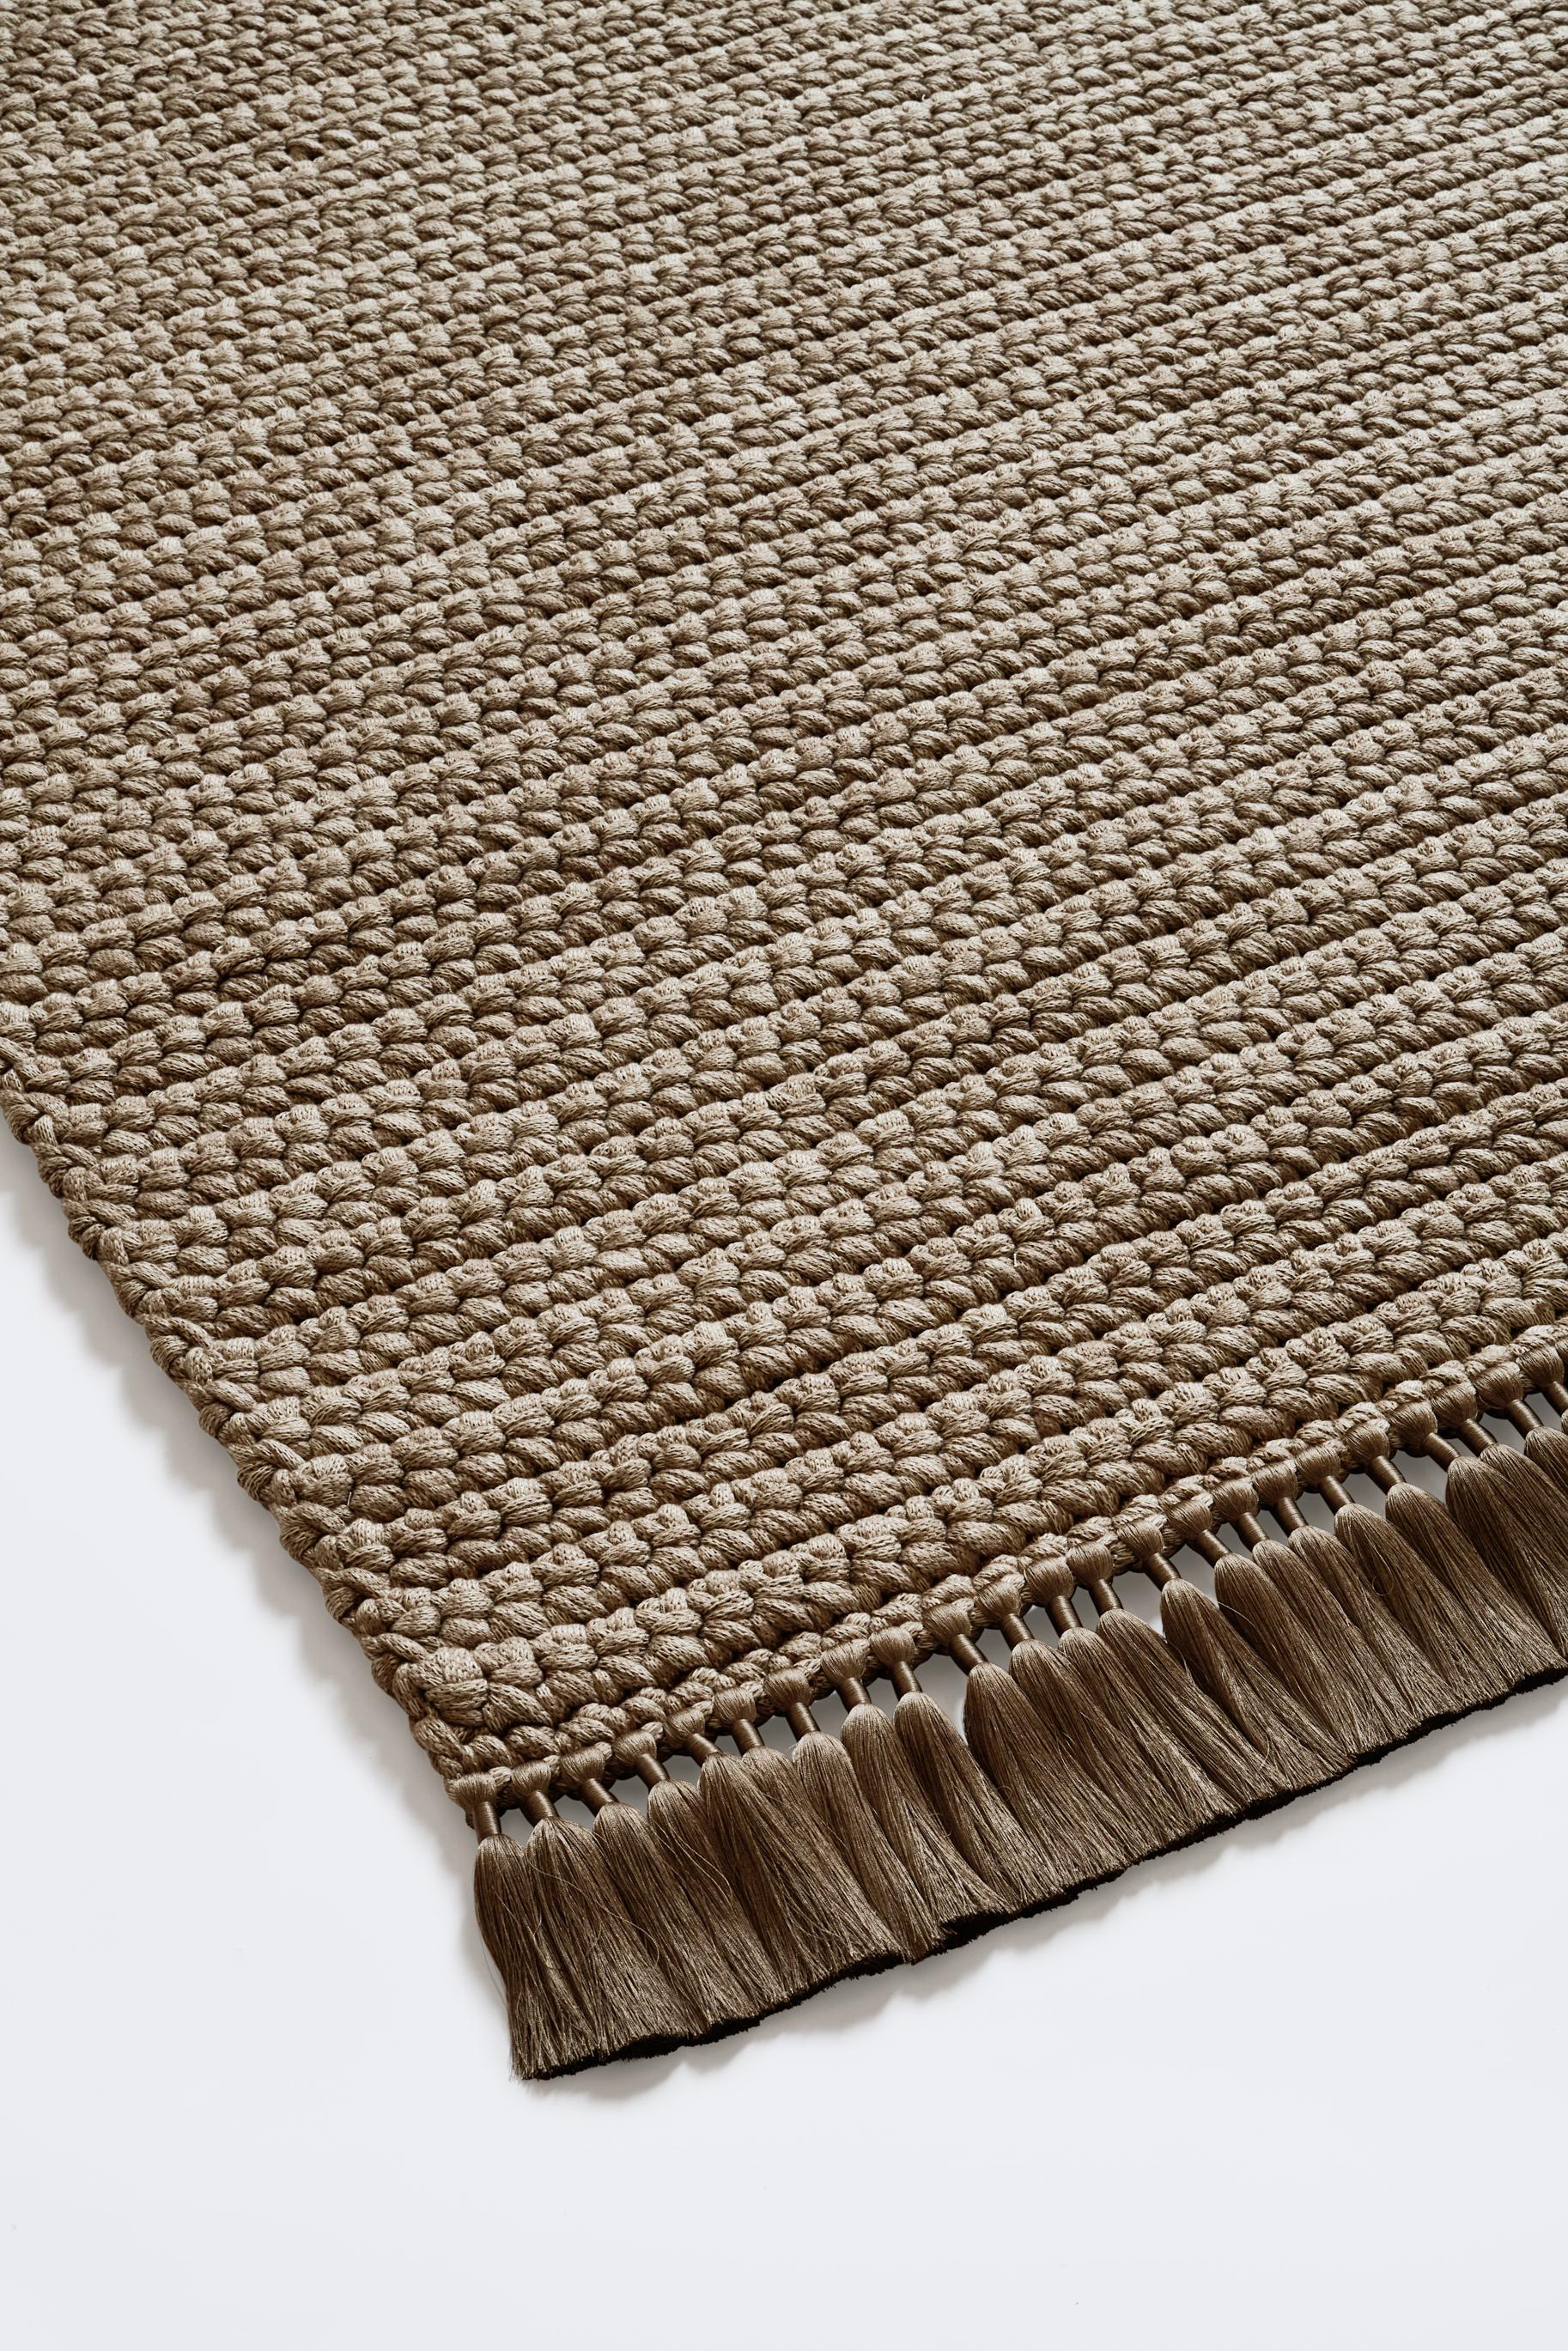 Hand-Crafted Handmade Crochet Thick Rug in Cacao Brown Beige Made of Cotton & Polyester For Sale